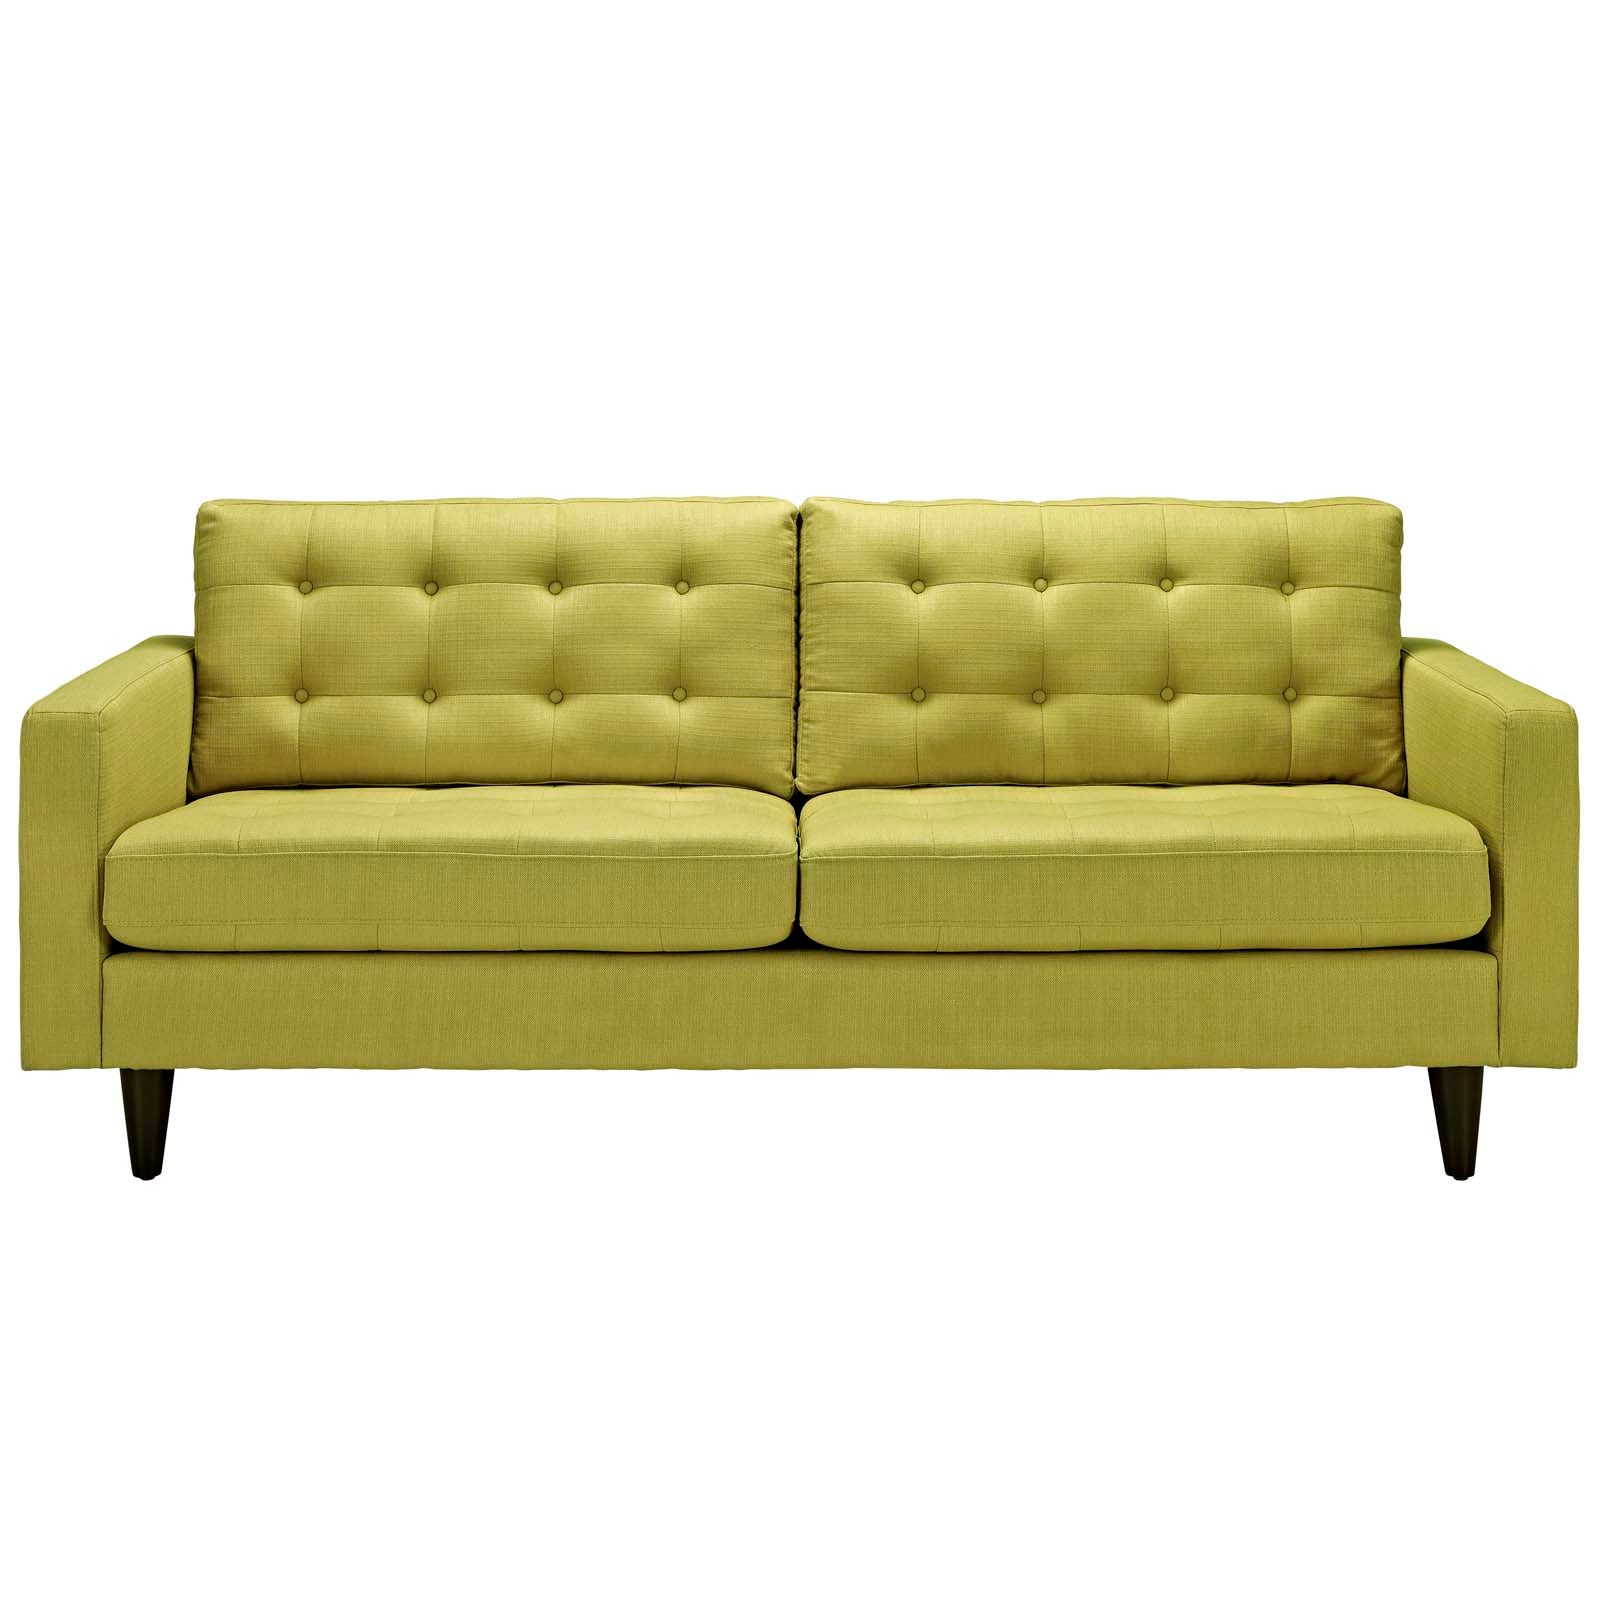 Modway Sofas & Couches - Empress Upholstered Fabric Sofa Wheatgrass